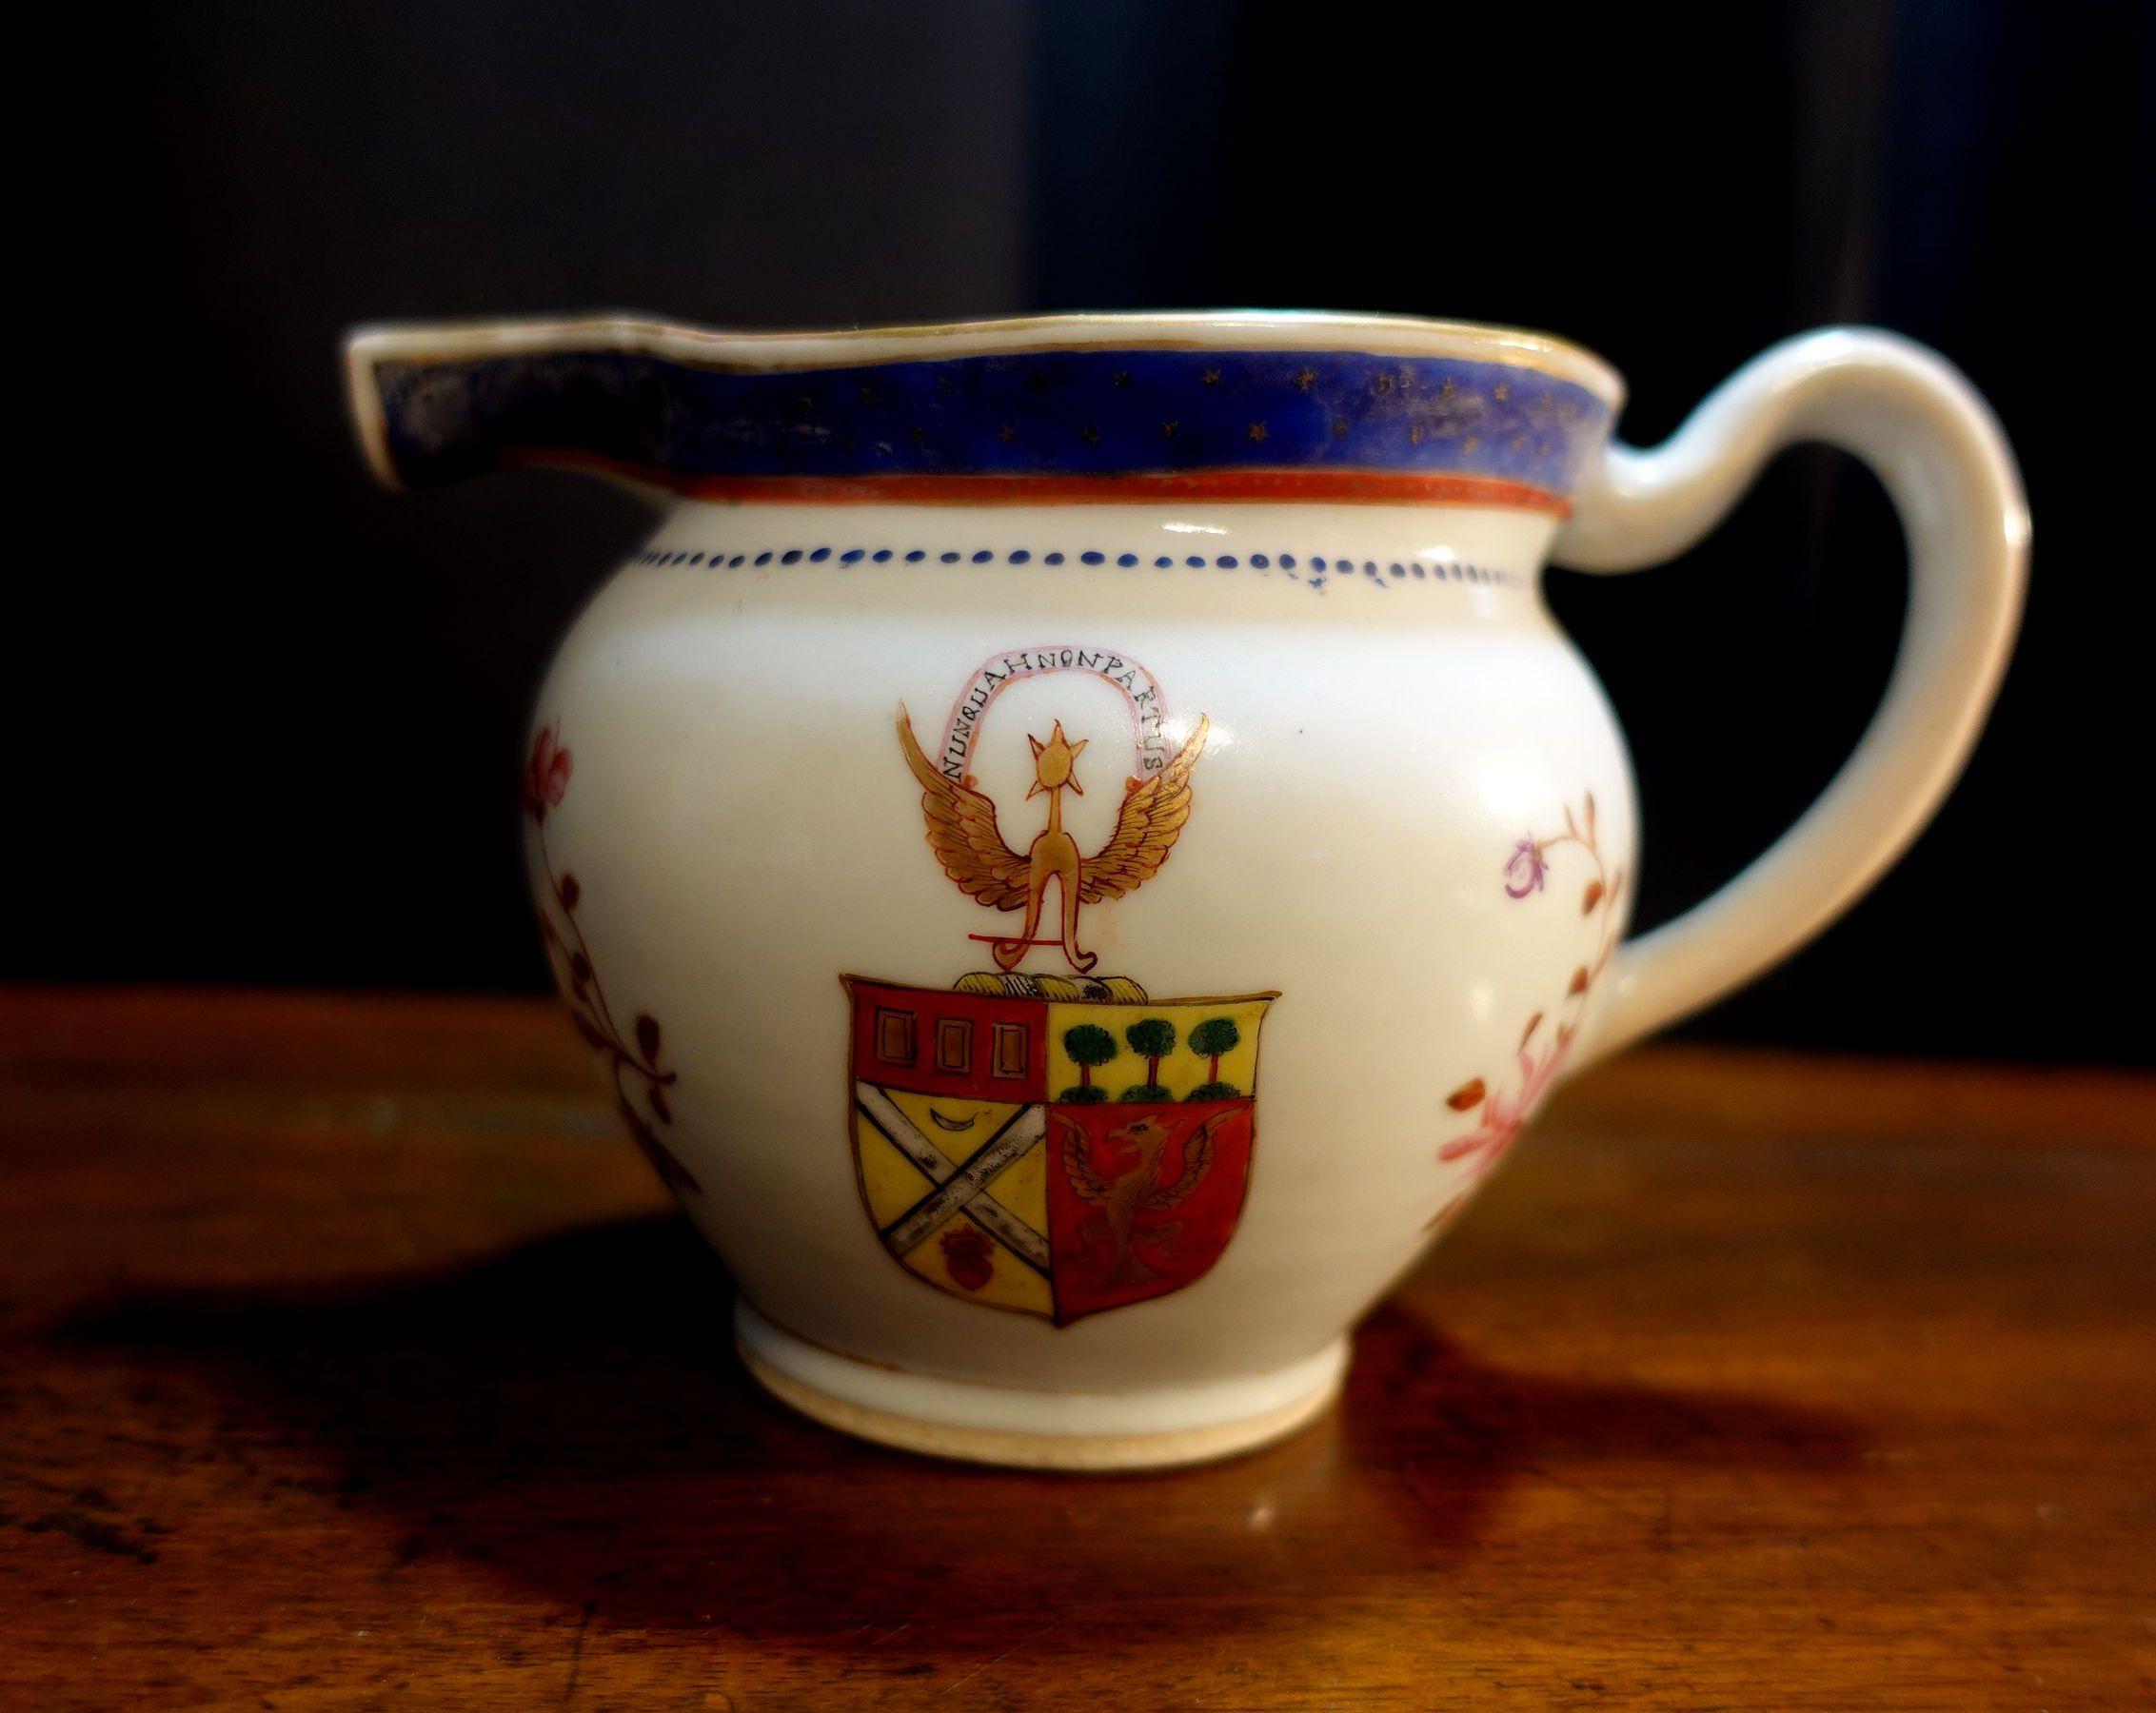 Made from Circa 1750s; Chinese export creamer with 